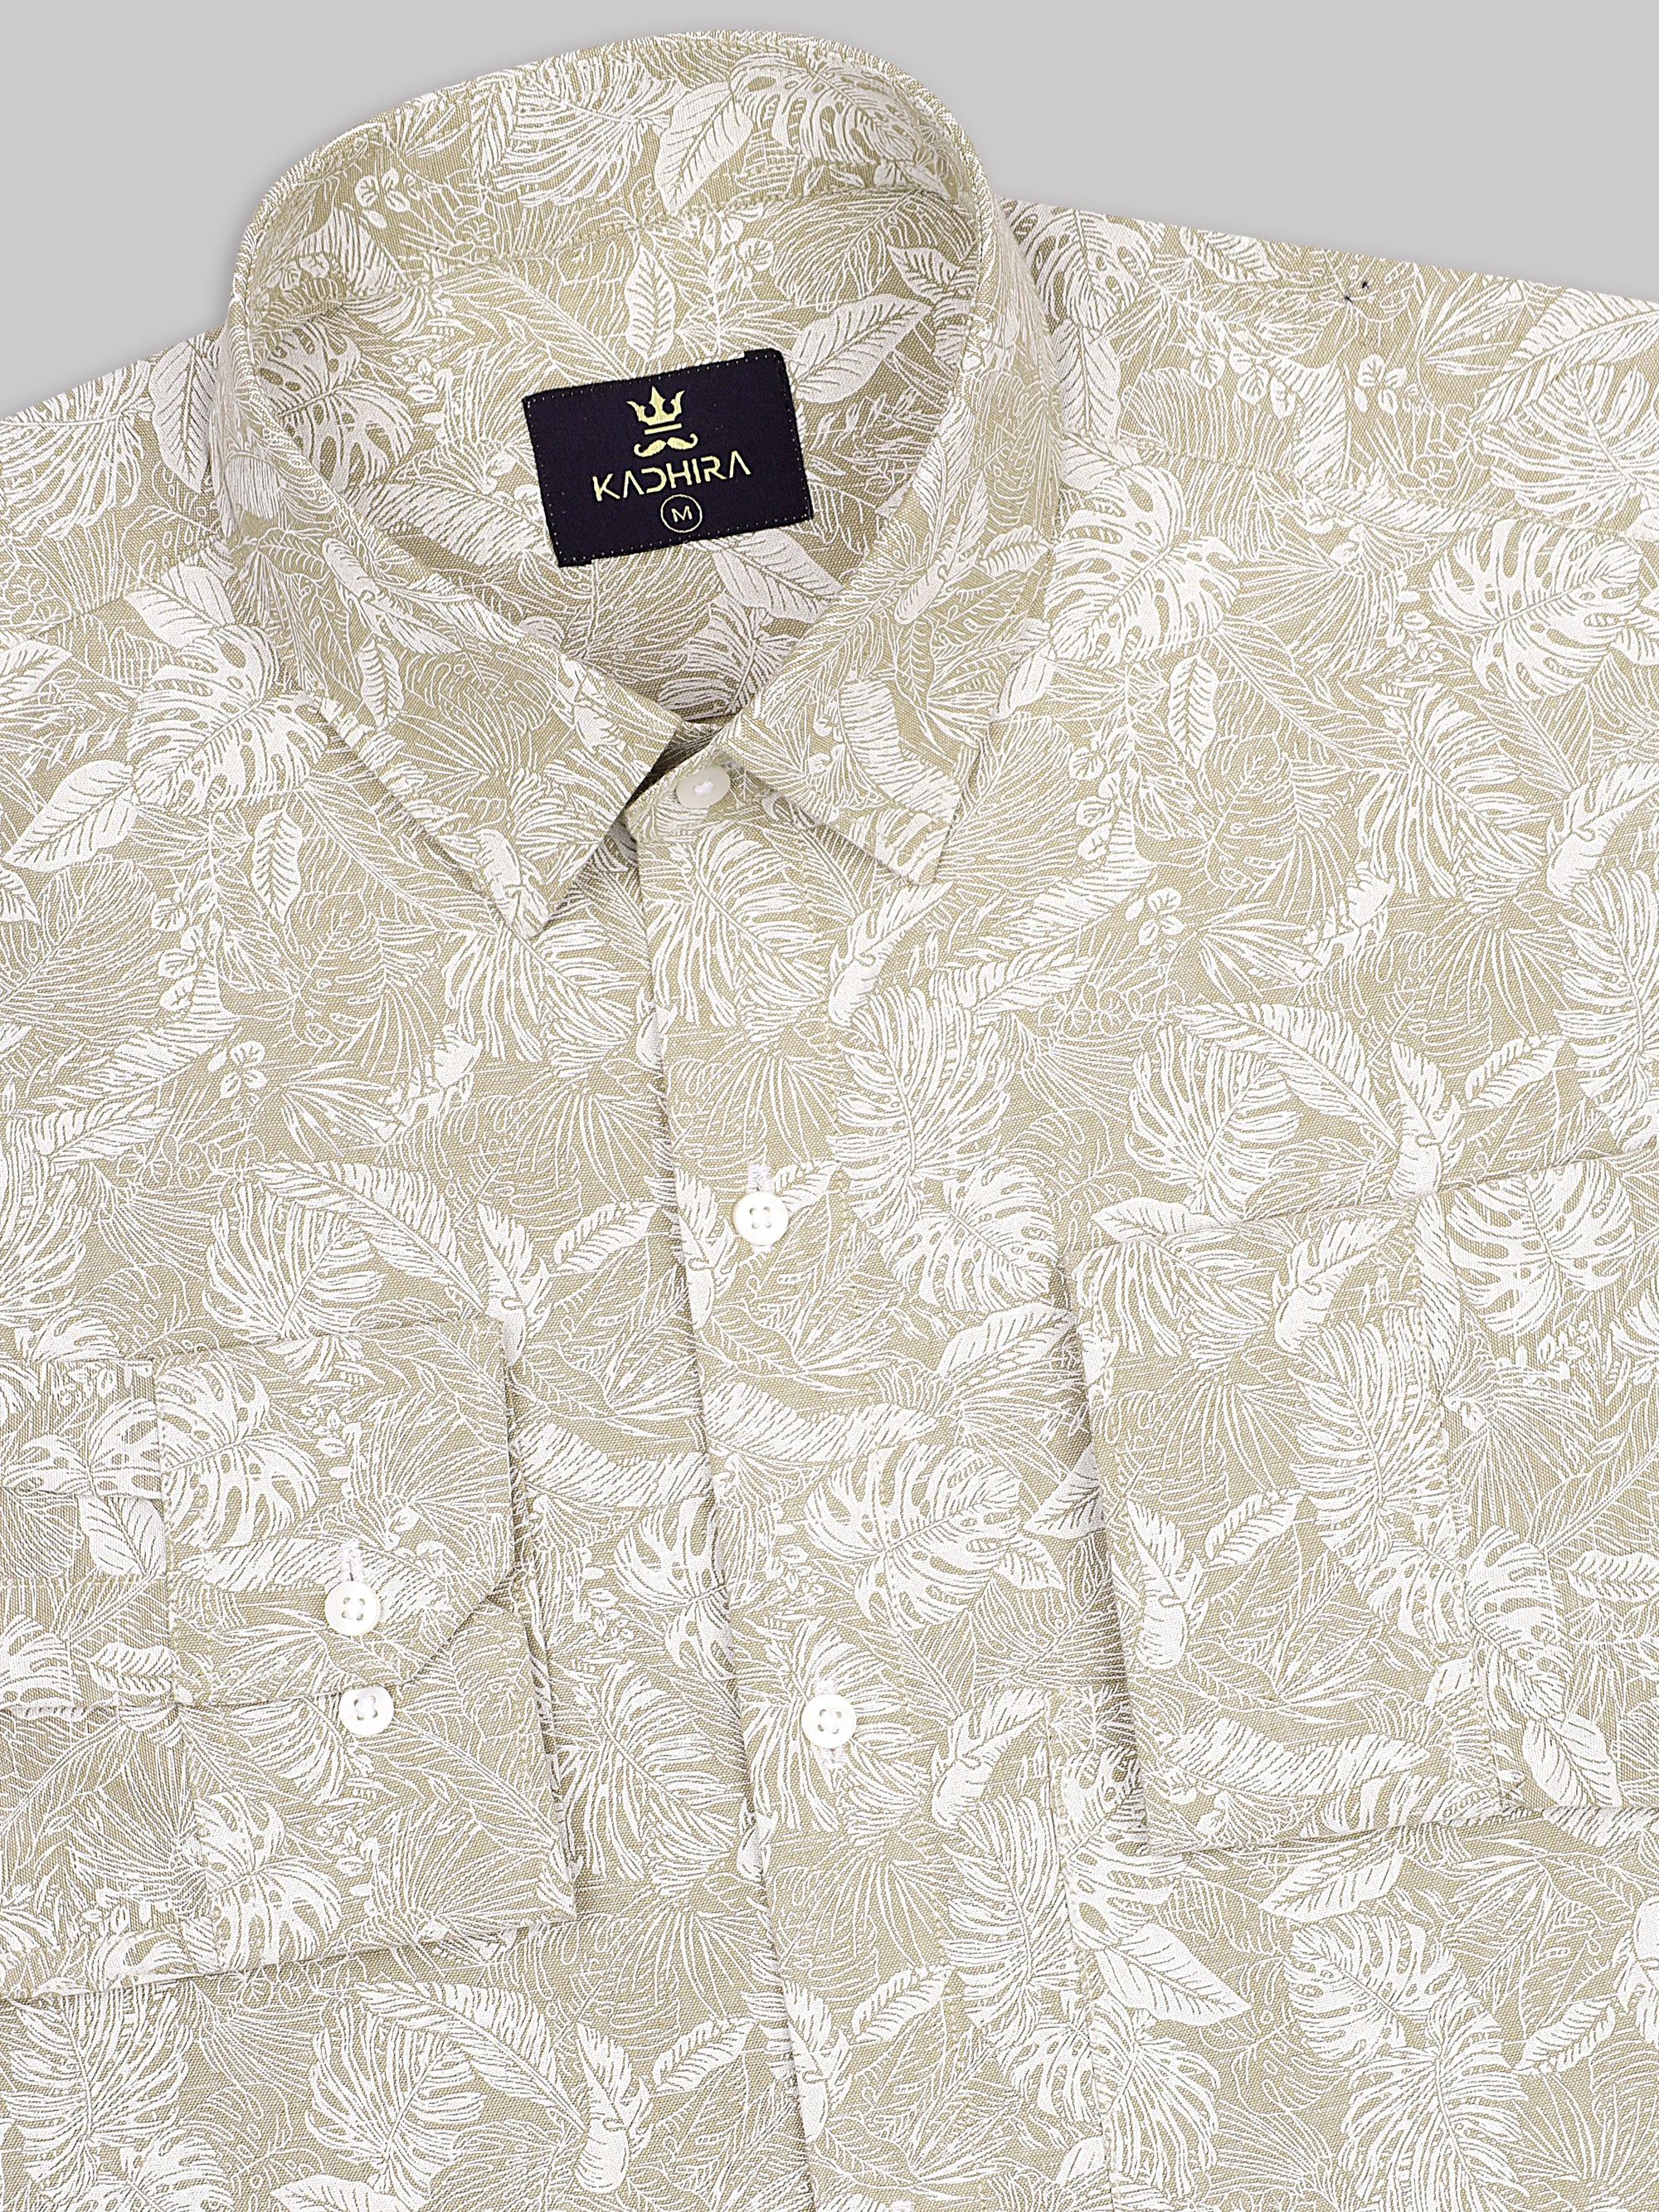 Classic Cream With White Leaf Printed Premium Cotton Shirt-[ON SALE]